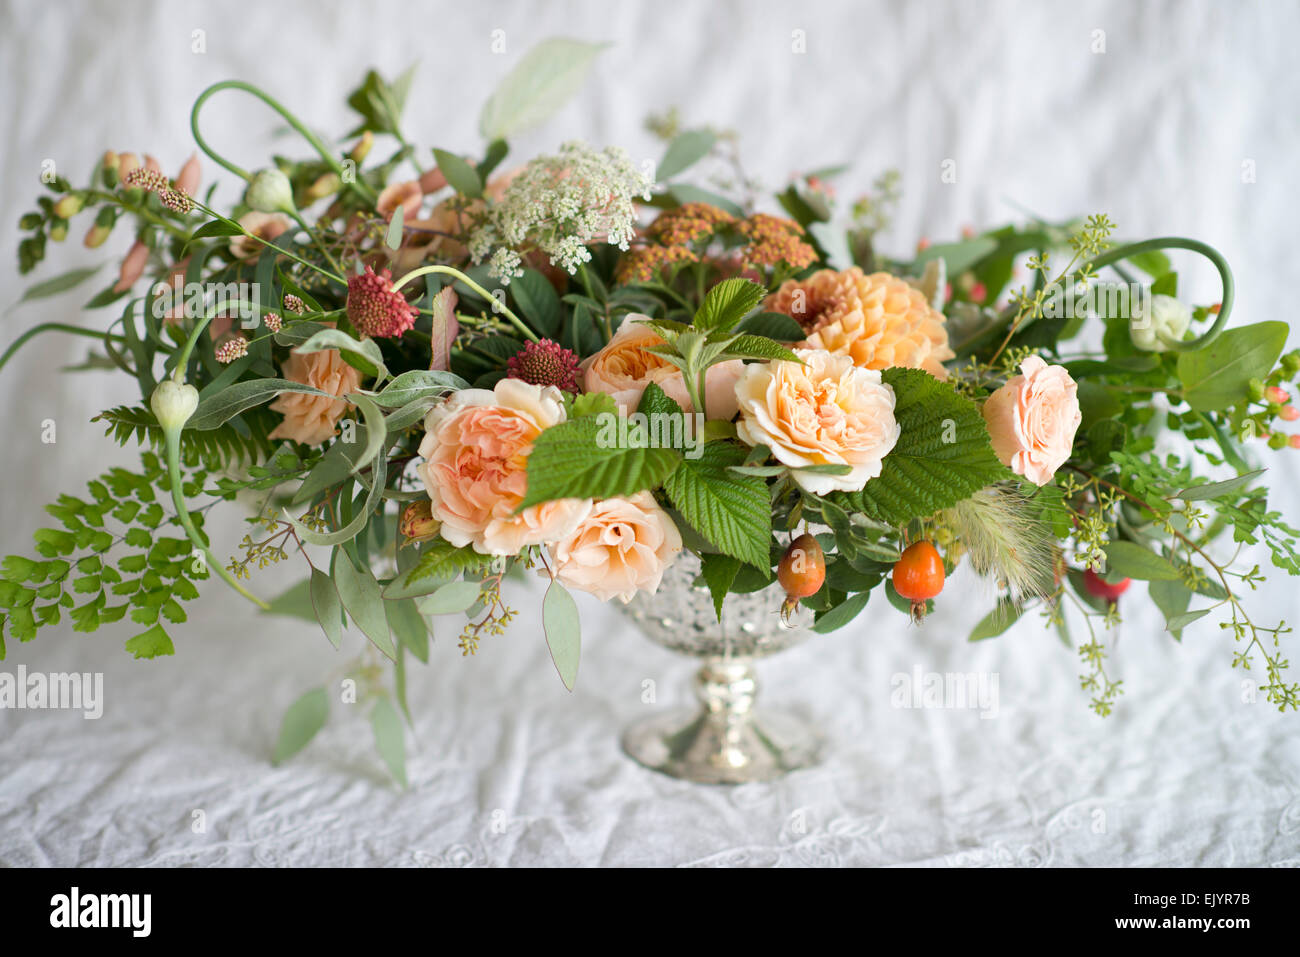 Formal floral arrangement of roses in silver urn Stock Photo